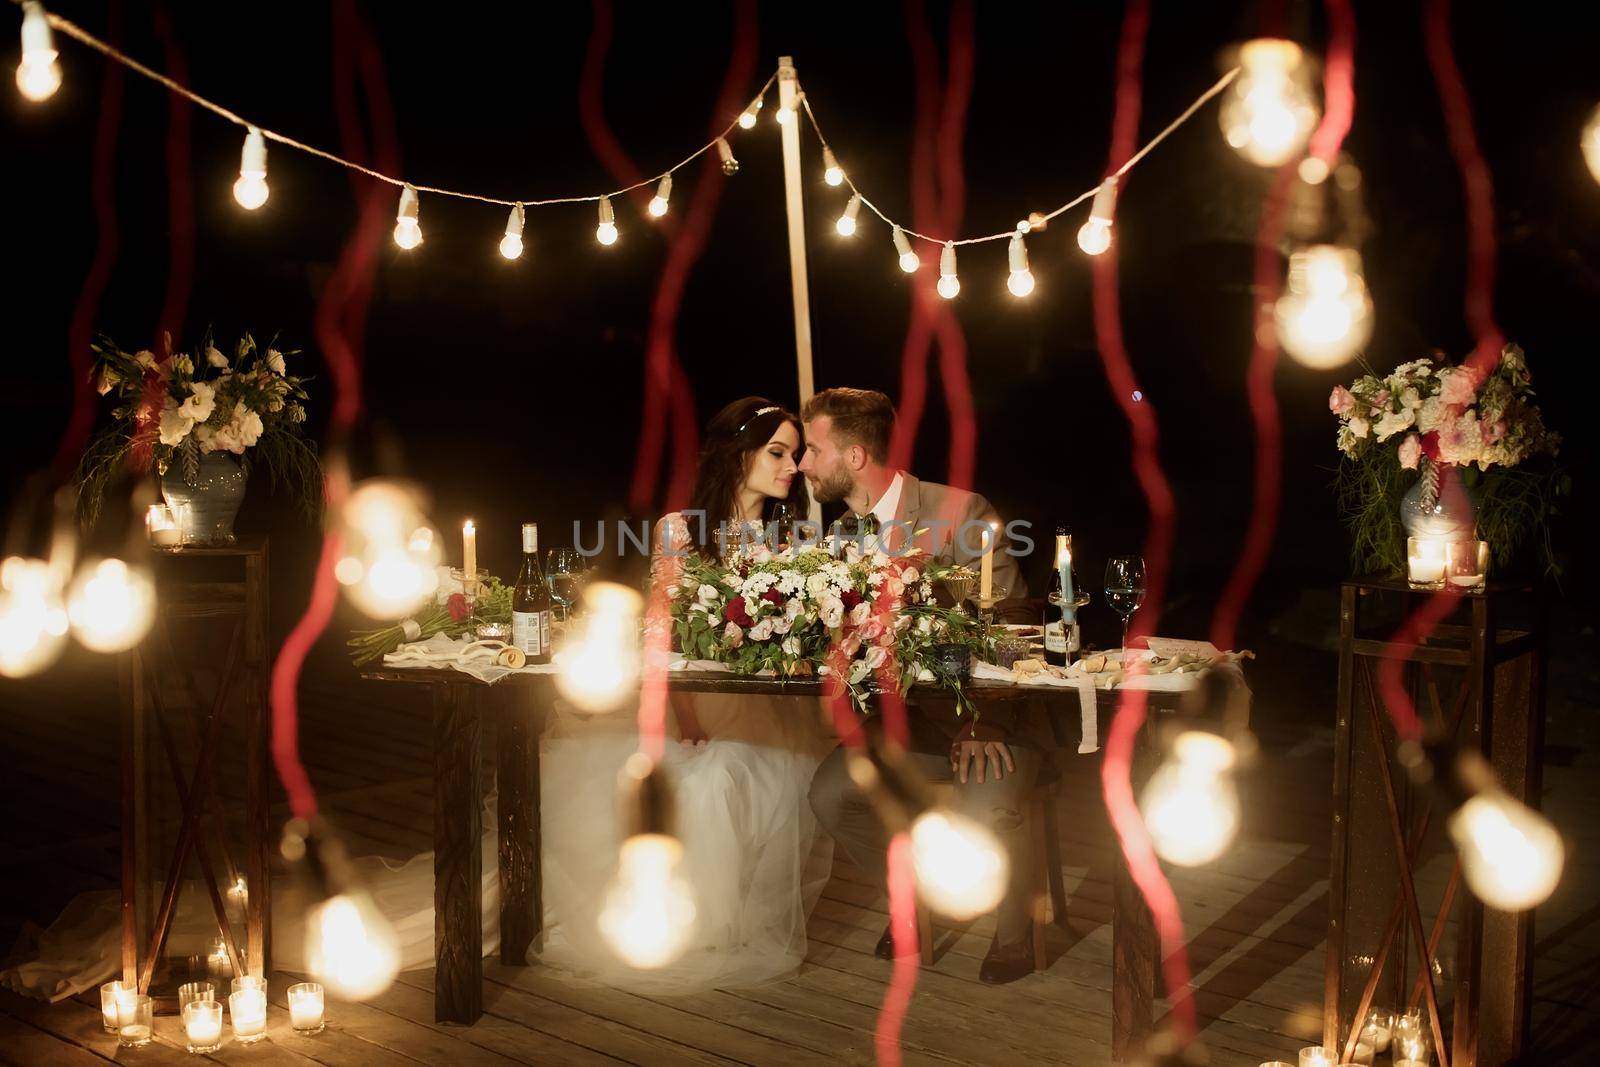 The night wedding ceremony. The bride and groom are sitting at the festive table. Banquet. by StudioPeace